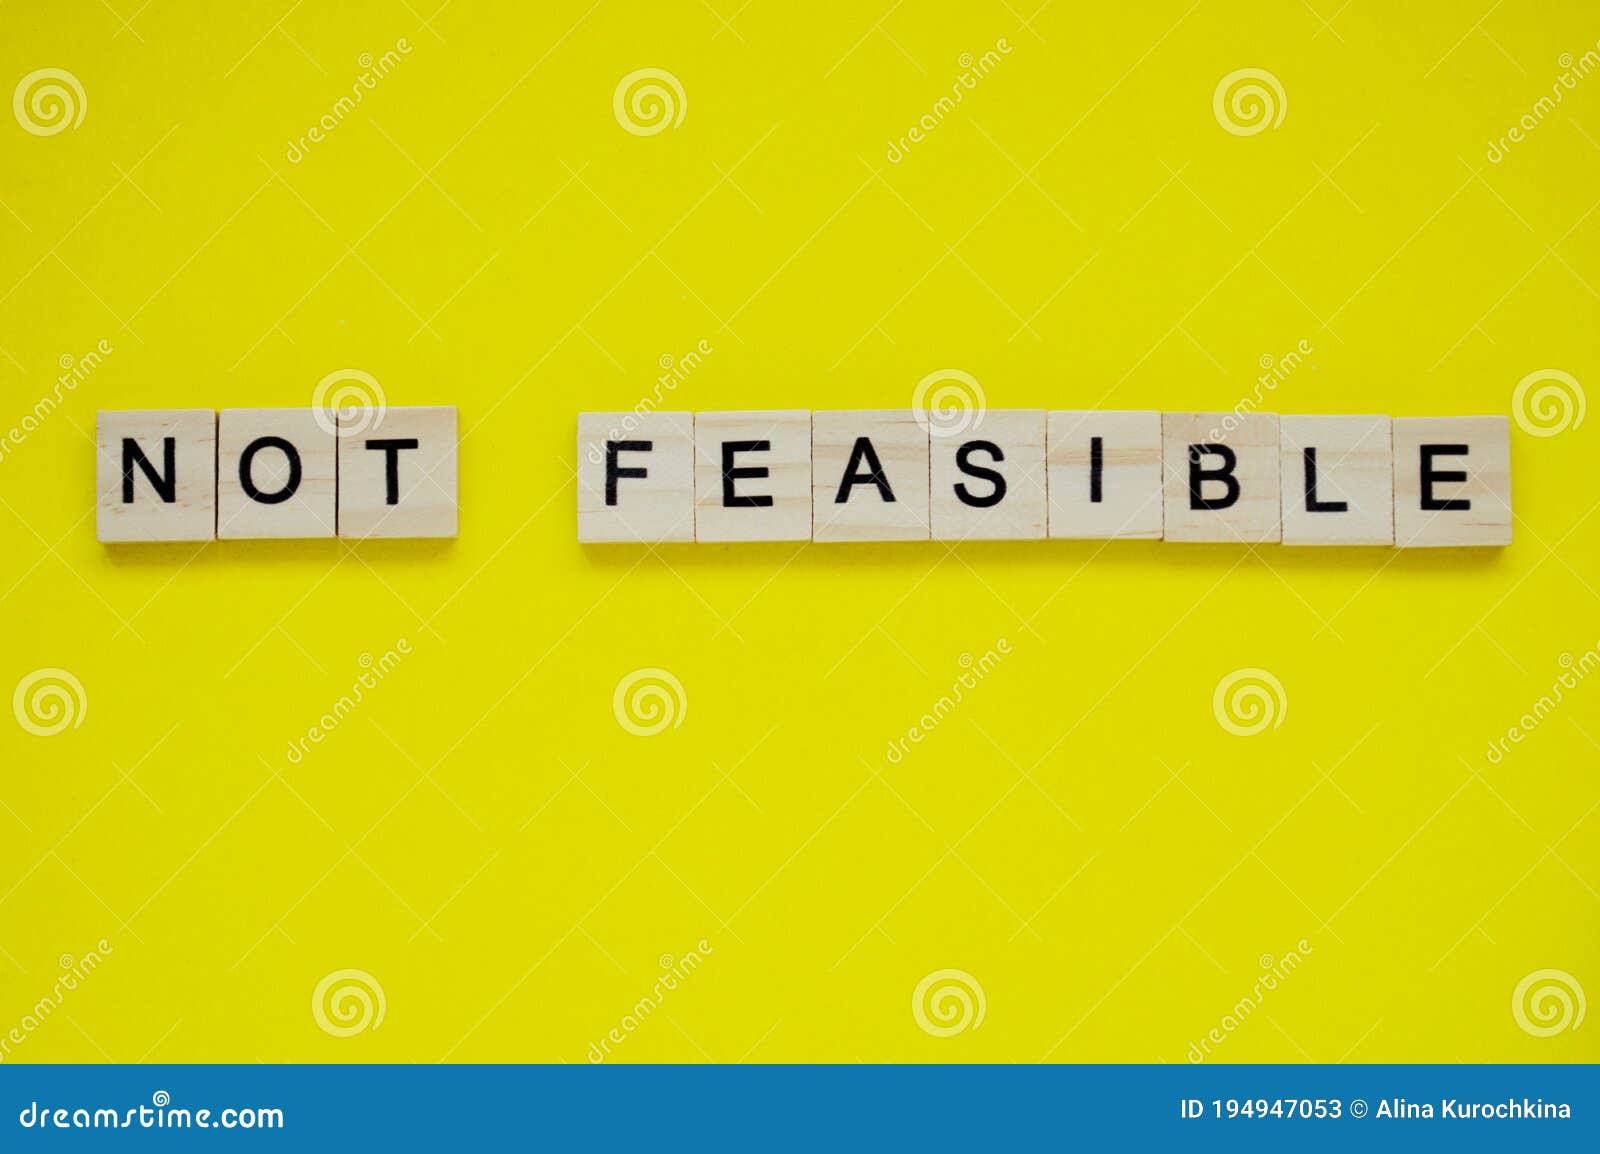 word not feasible. top view of wooden blocks with letters on yellow surface